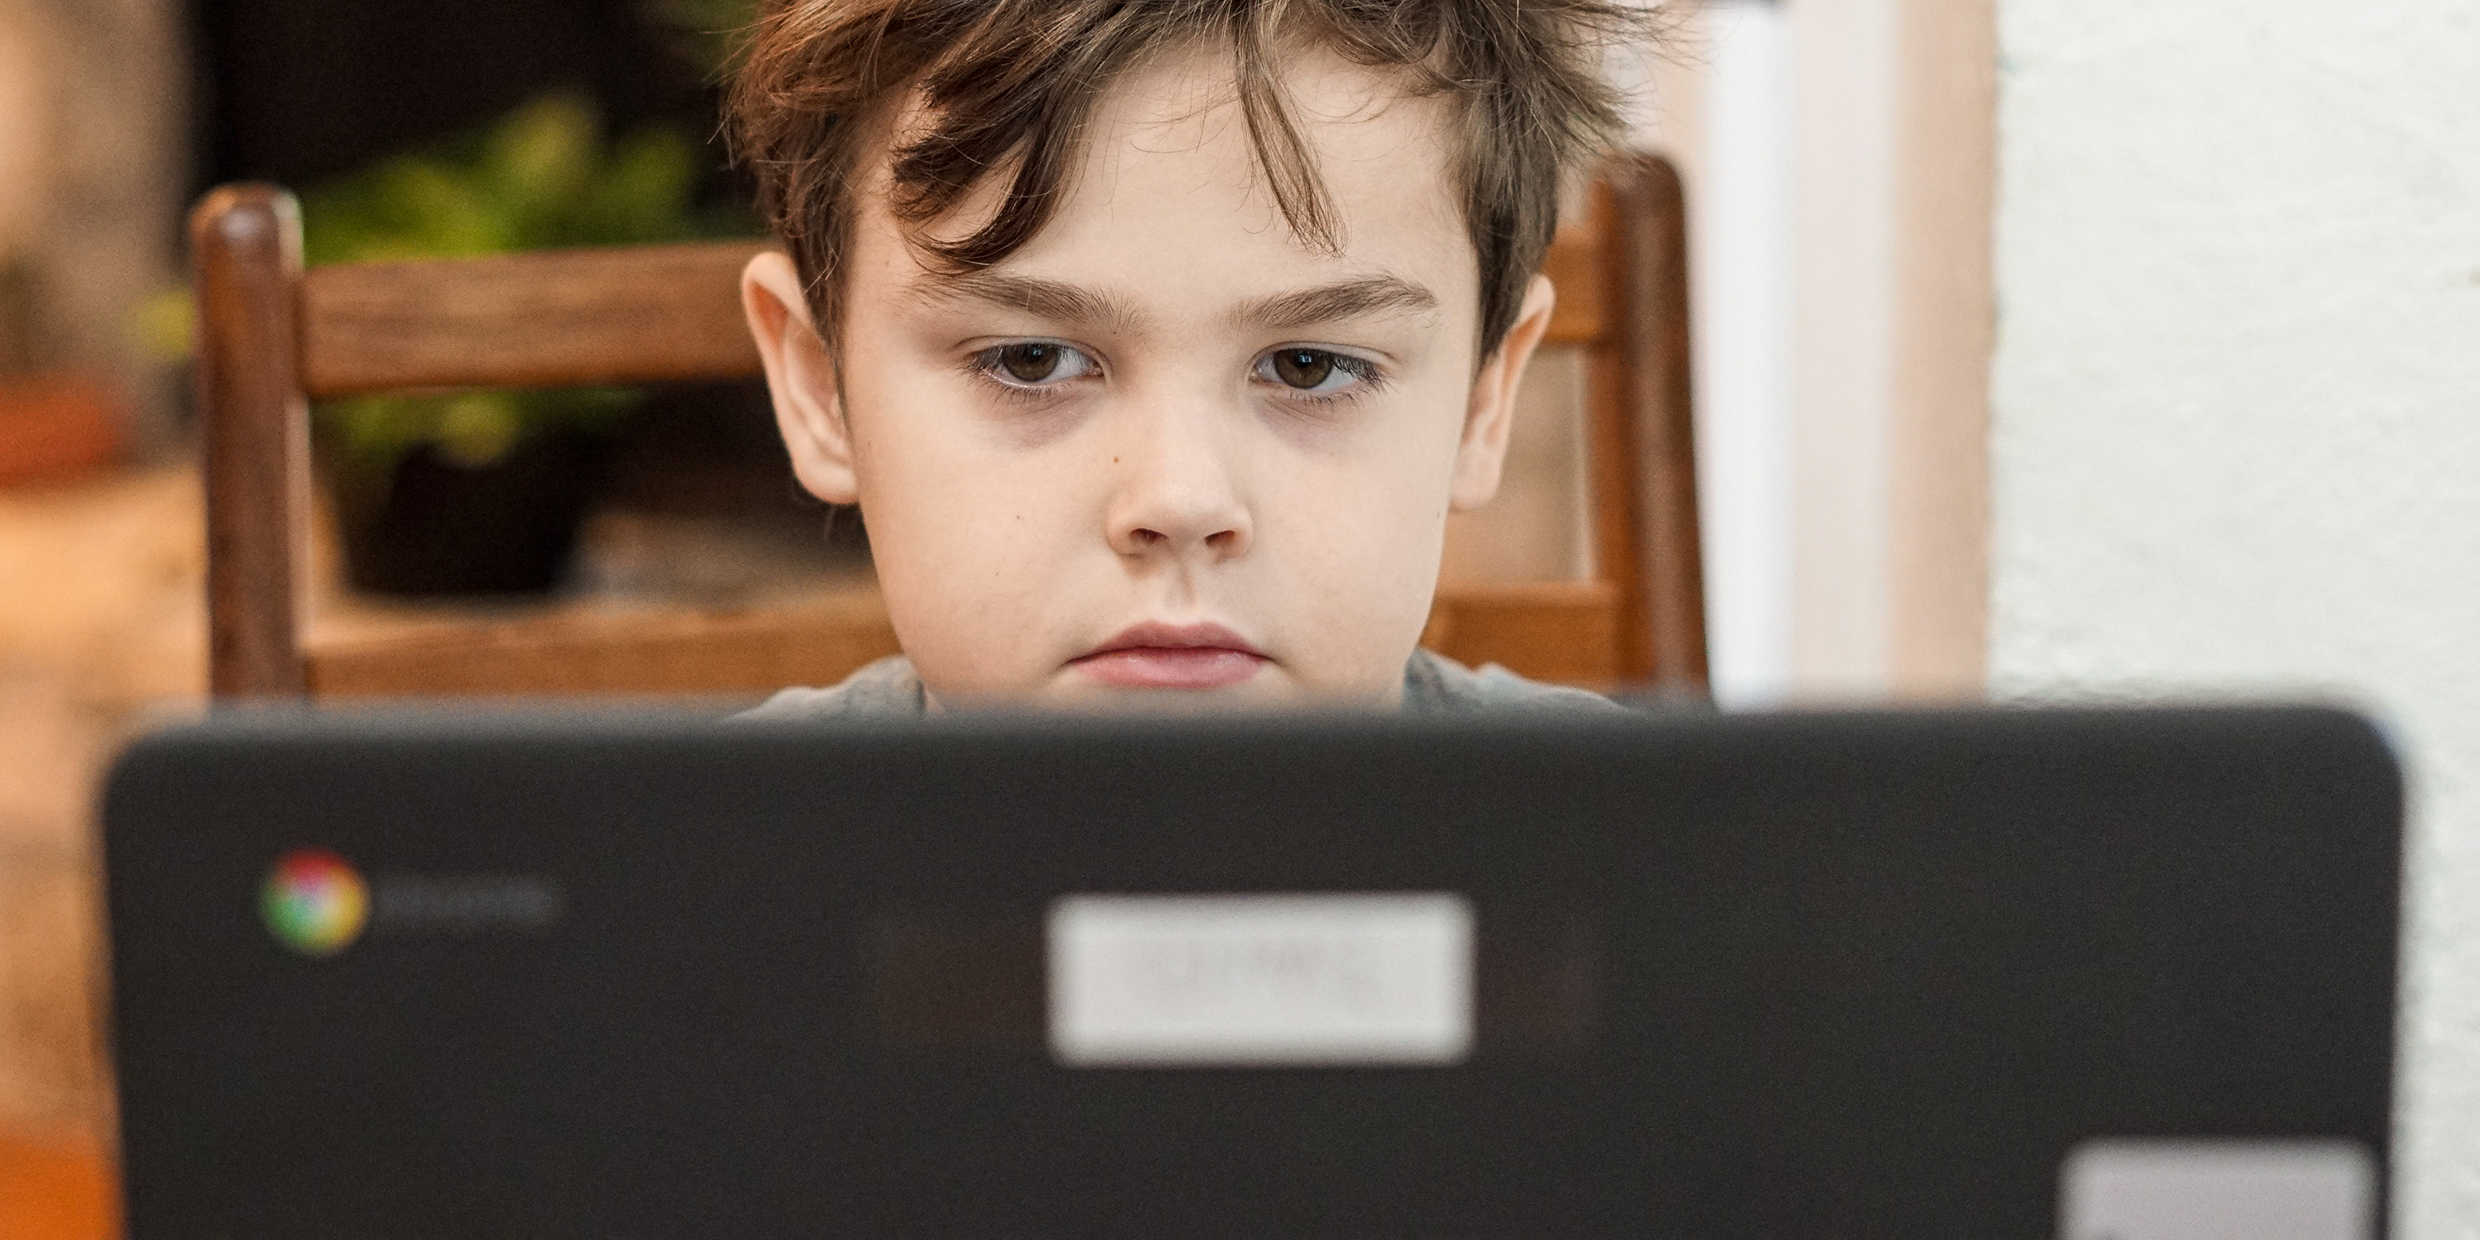 Image of a young boy staring intently at a laptop screen